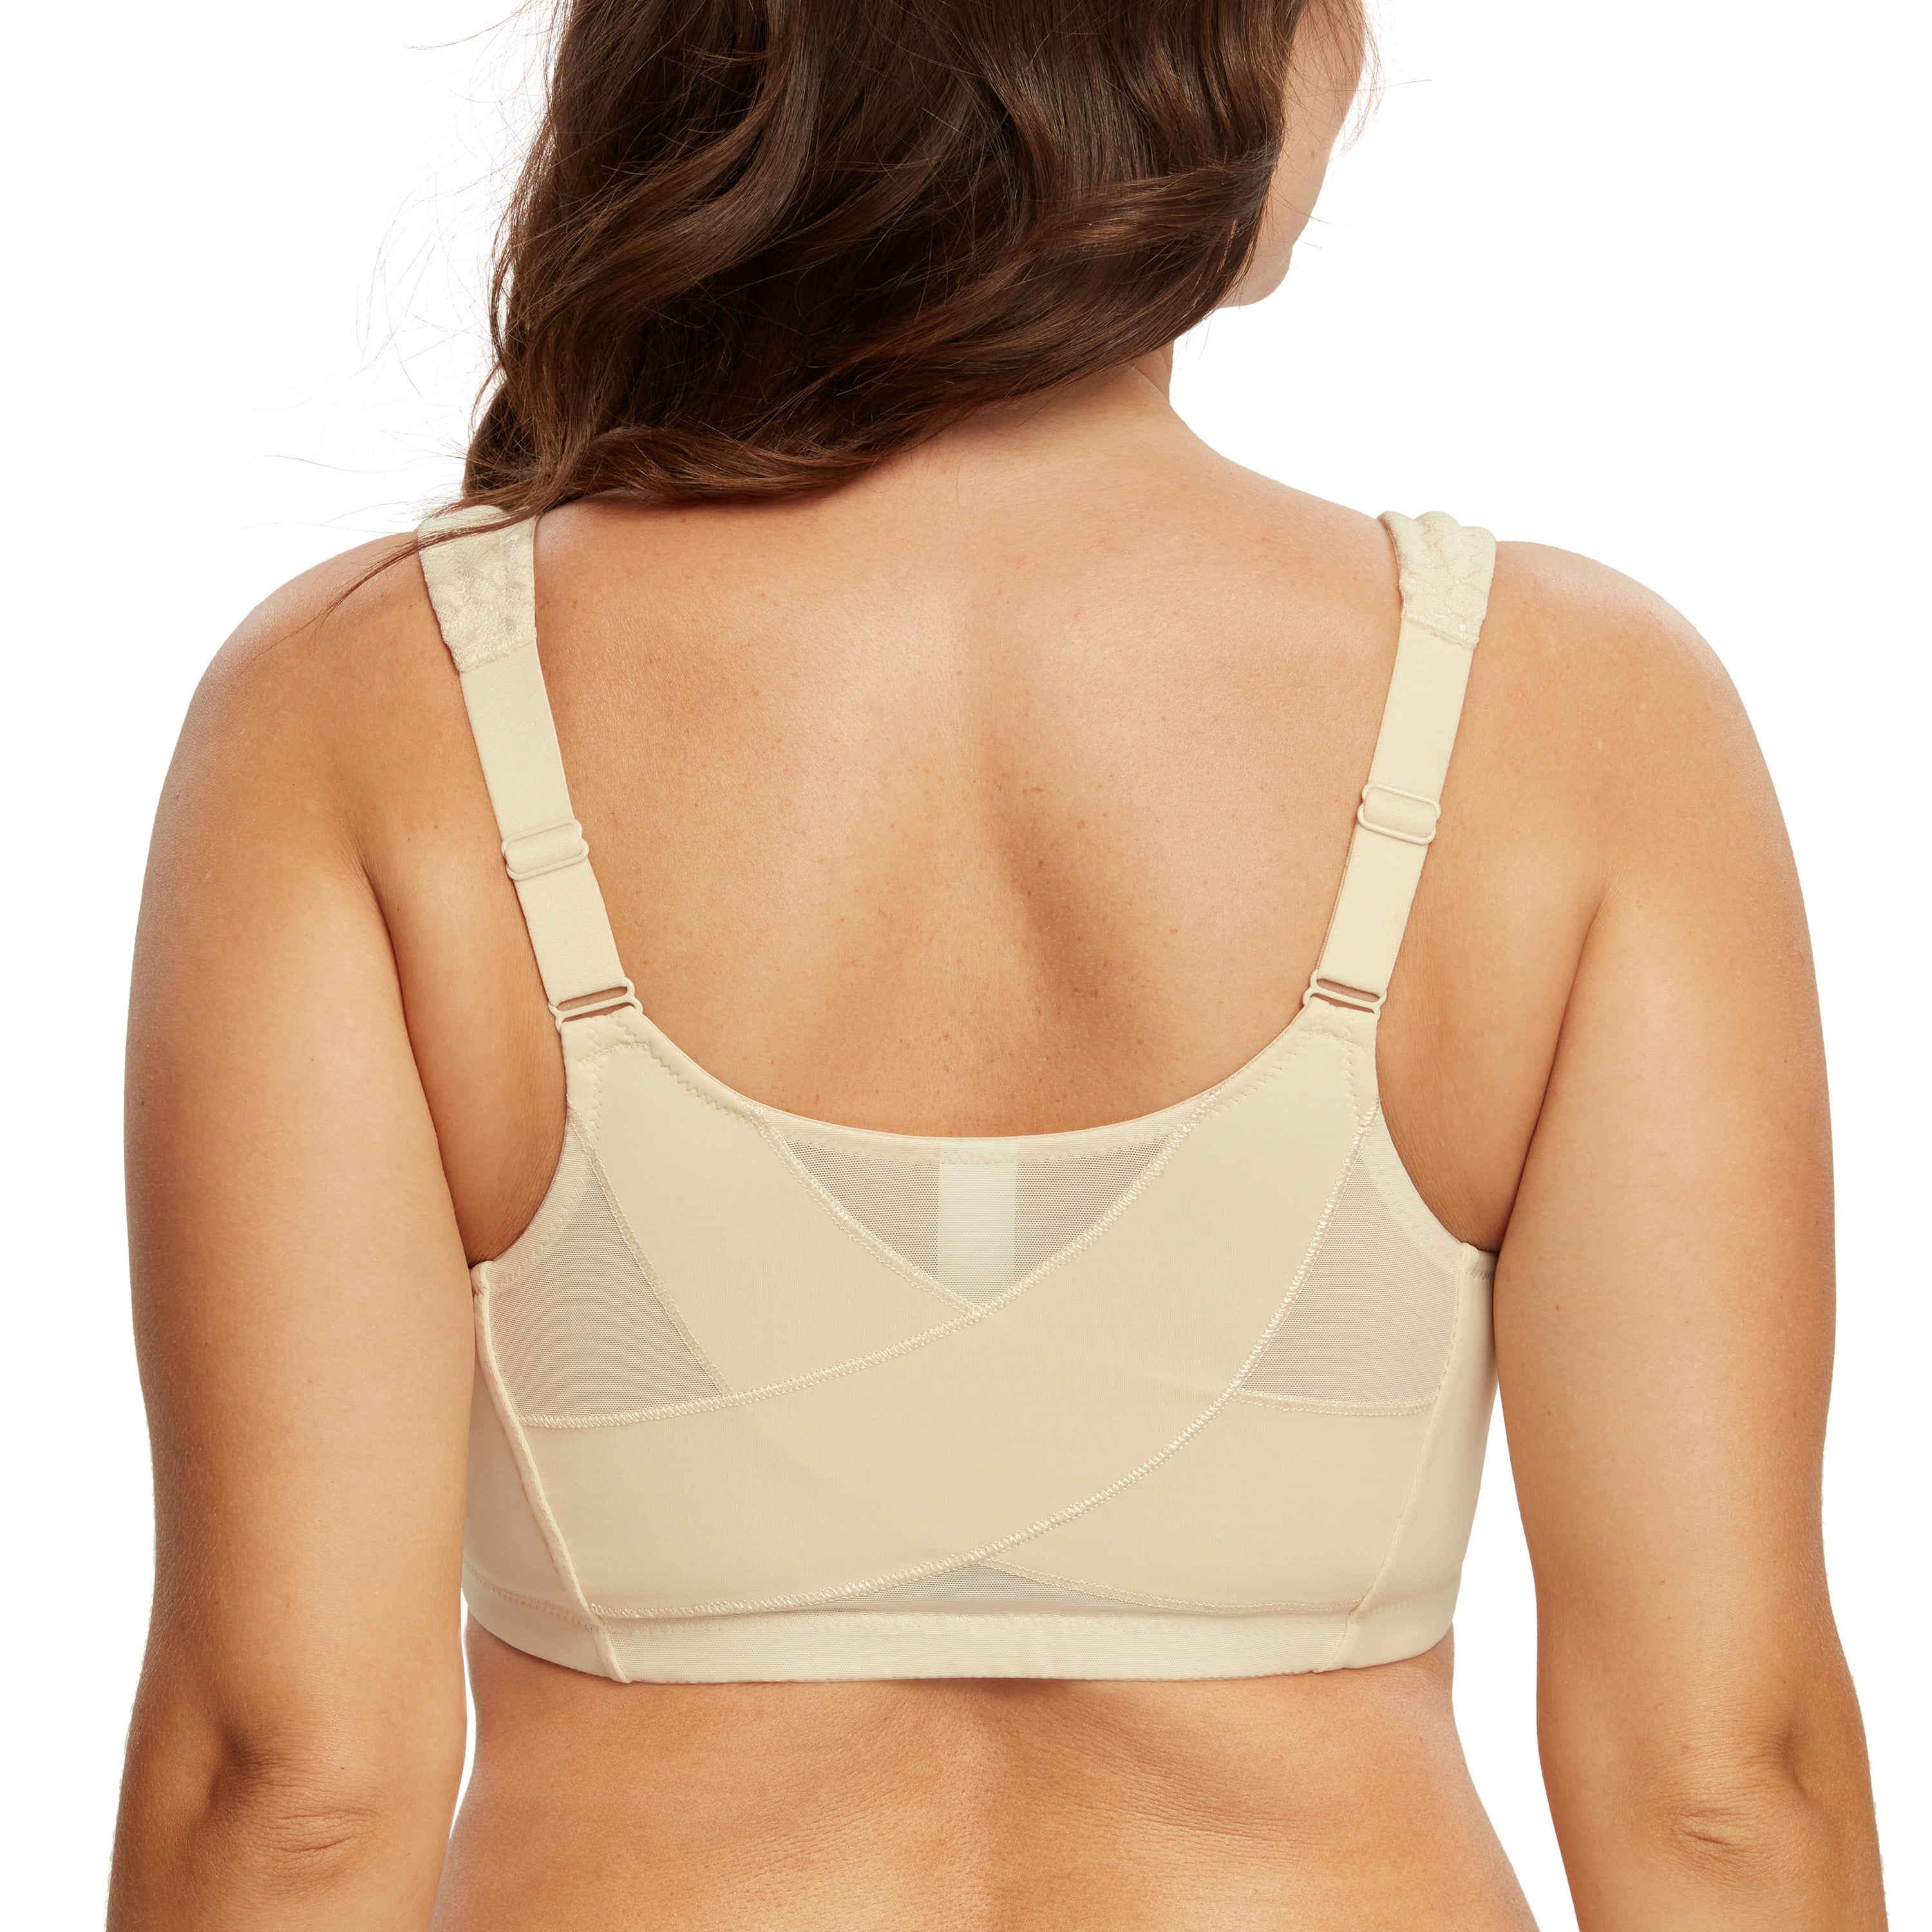 Exclare Women's Front Closure Full Coverage Wirefree Posture Back Everyday  Bra(36DD, Black) 